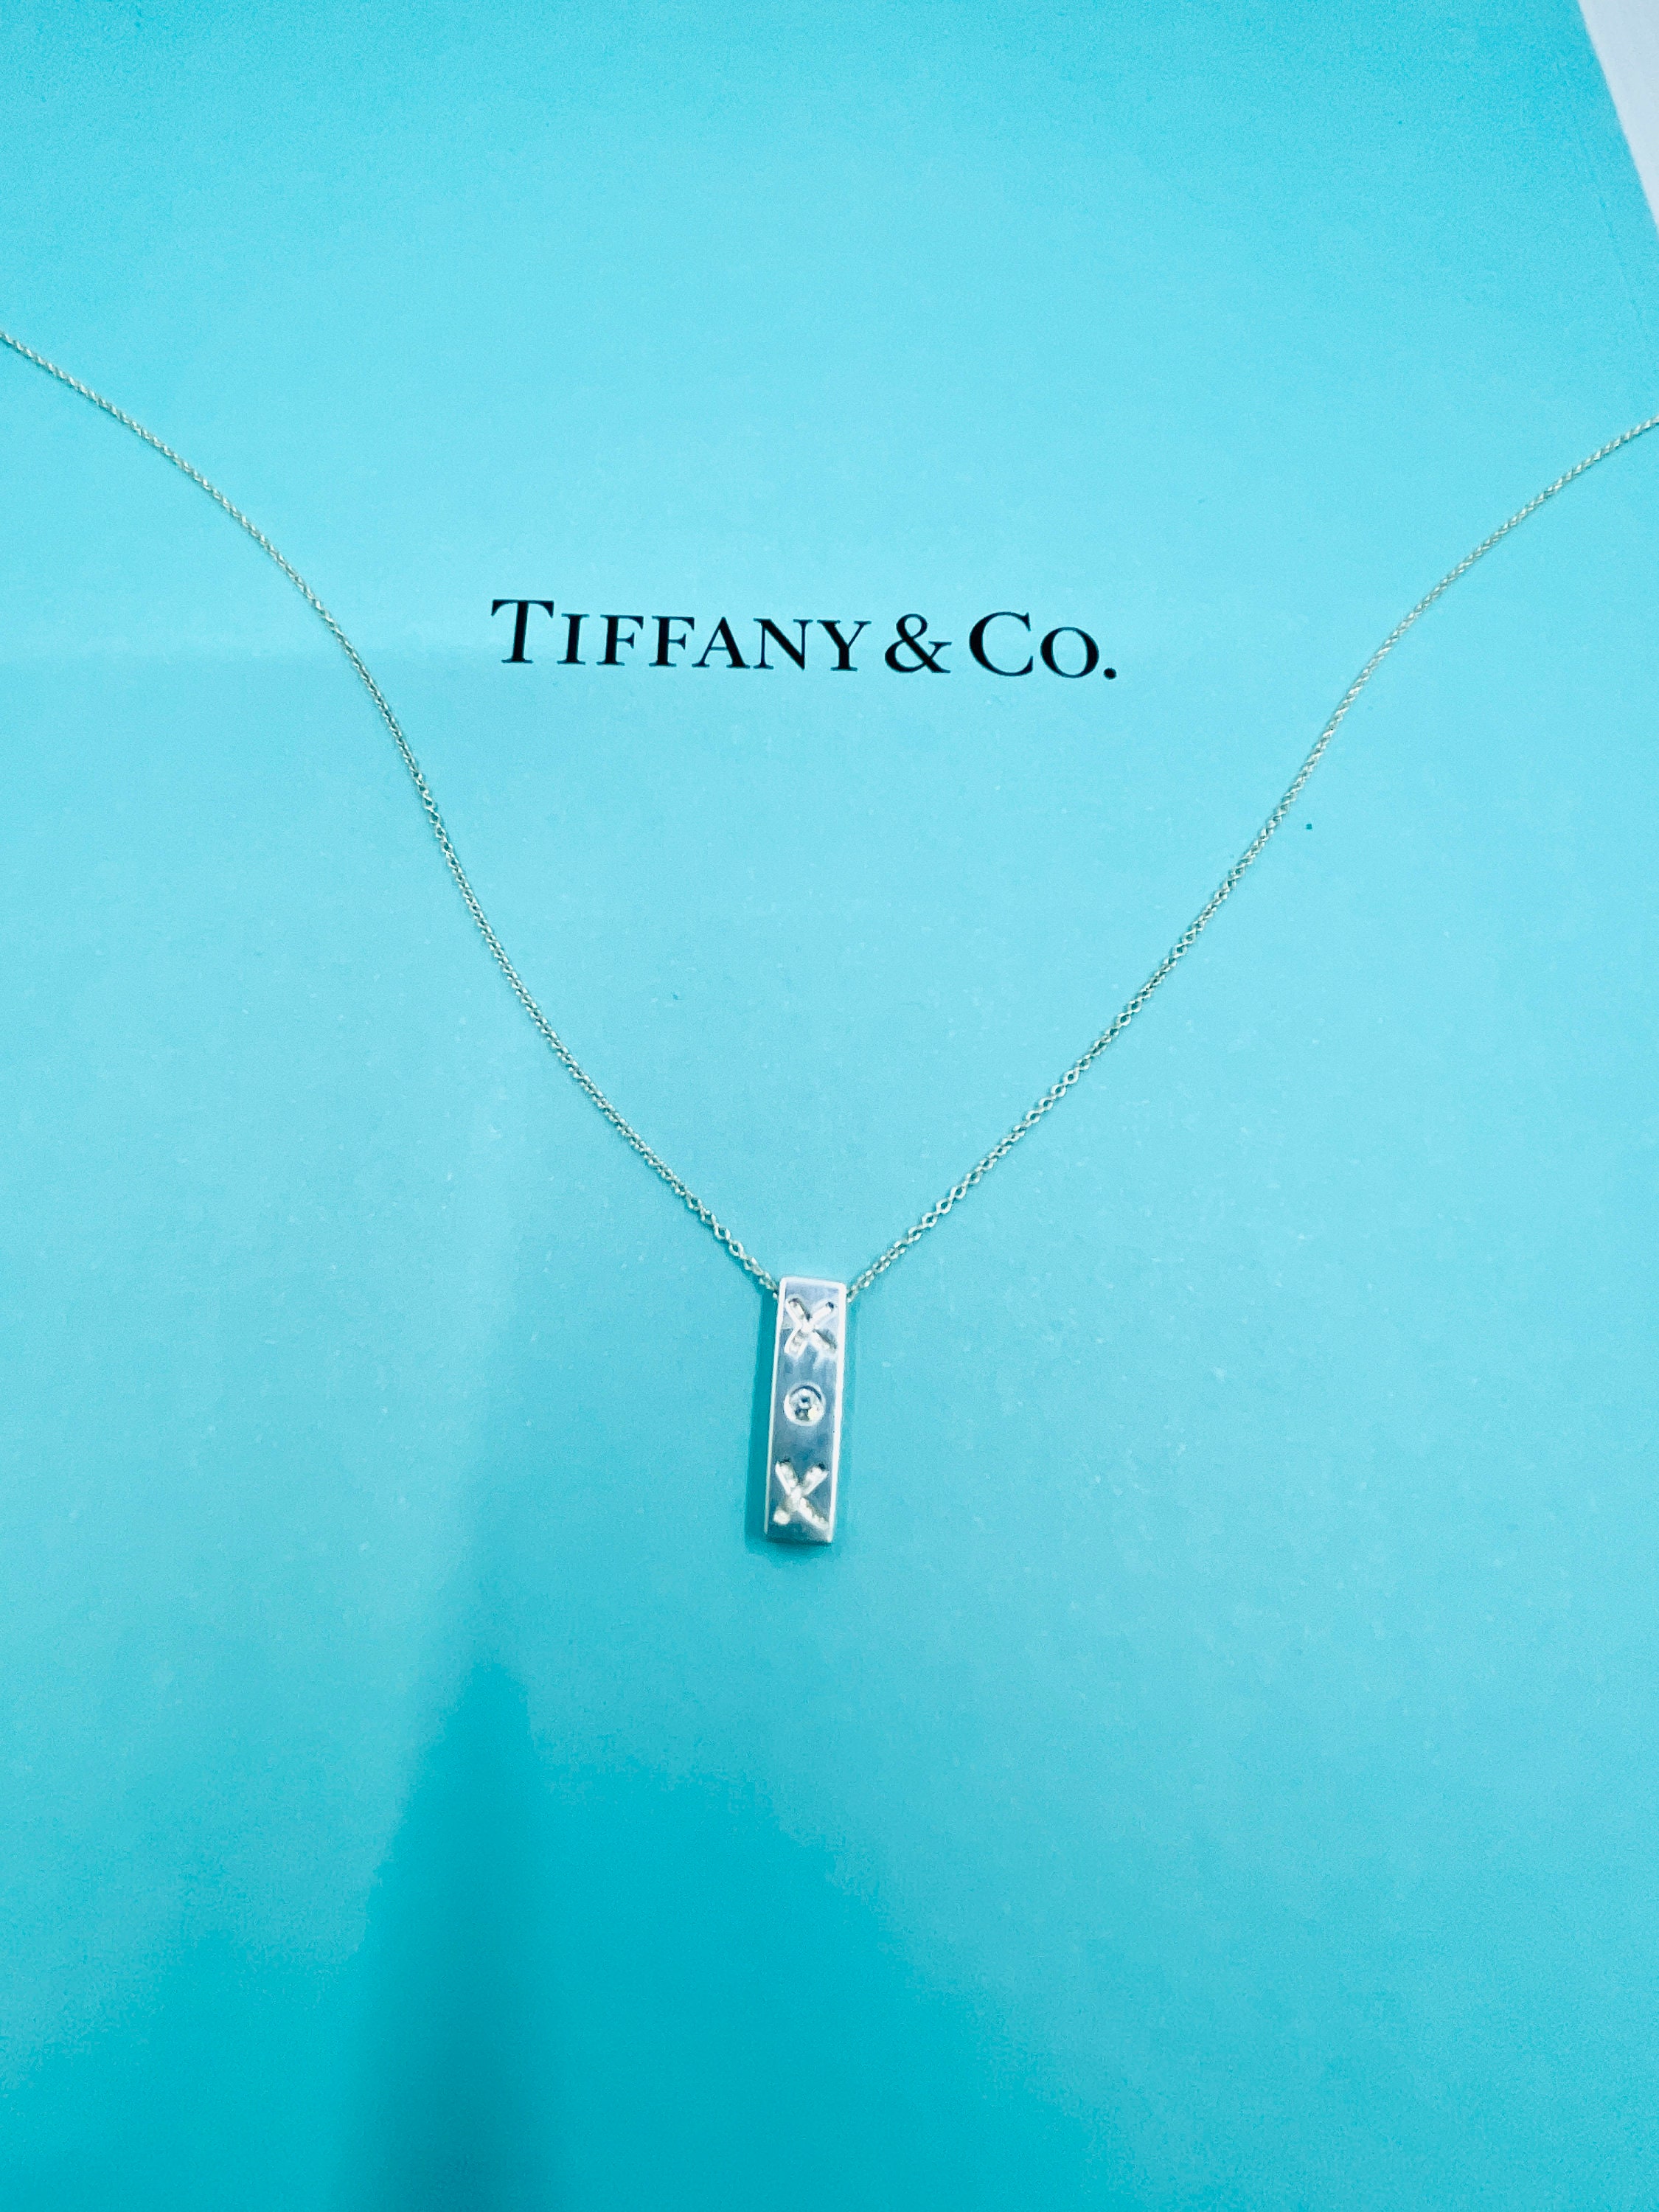 Authentic Tiffany&co. Paloma Picasso Bar Diamond Necklace in